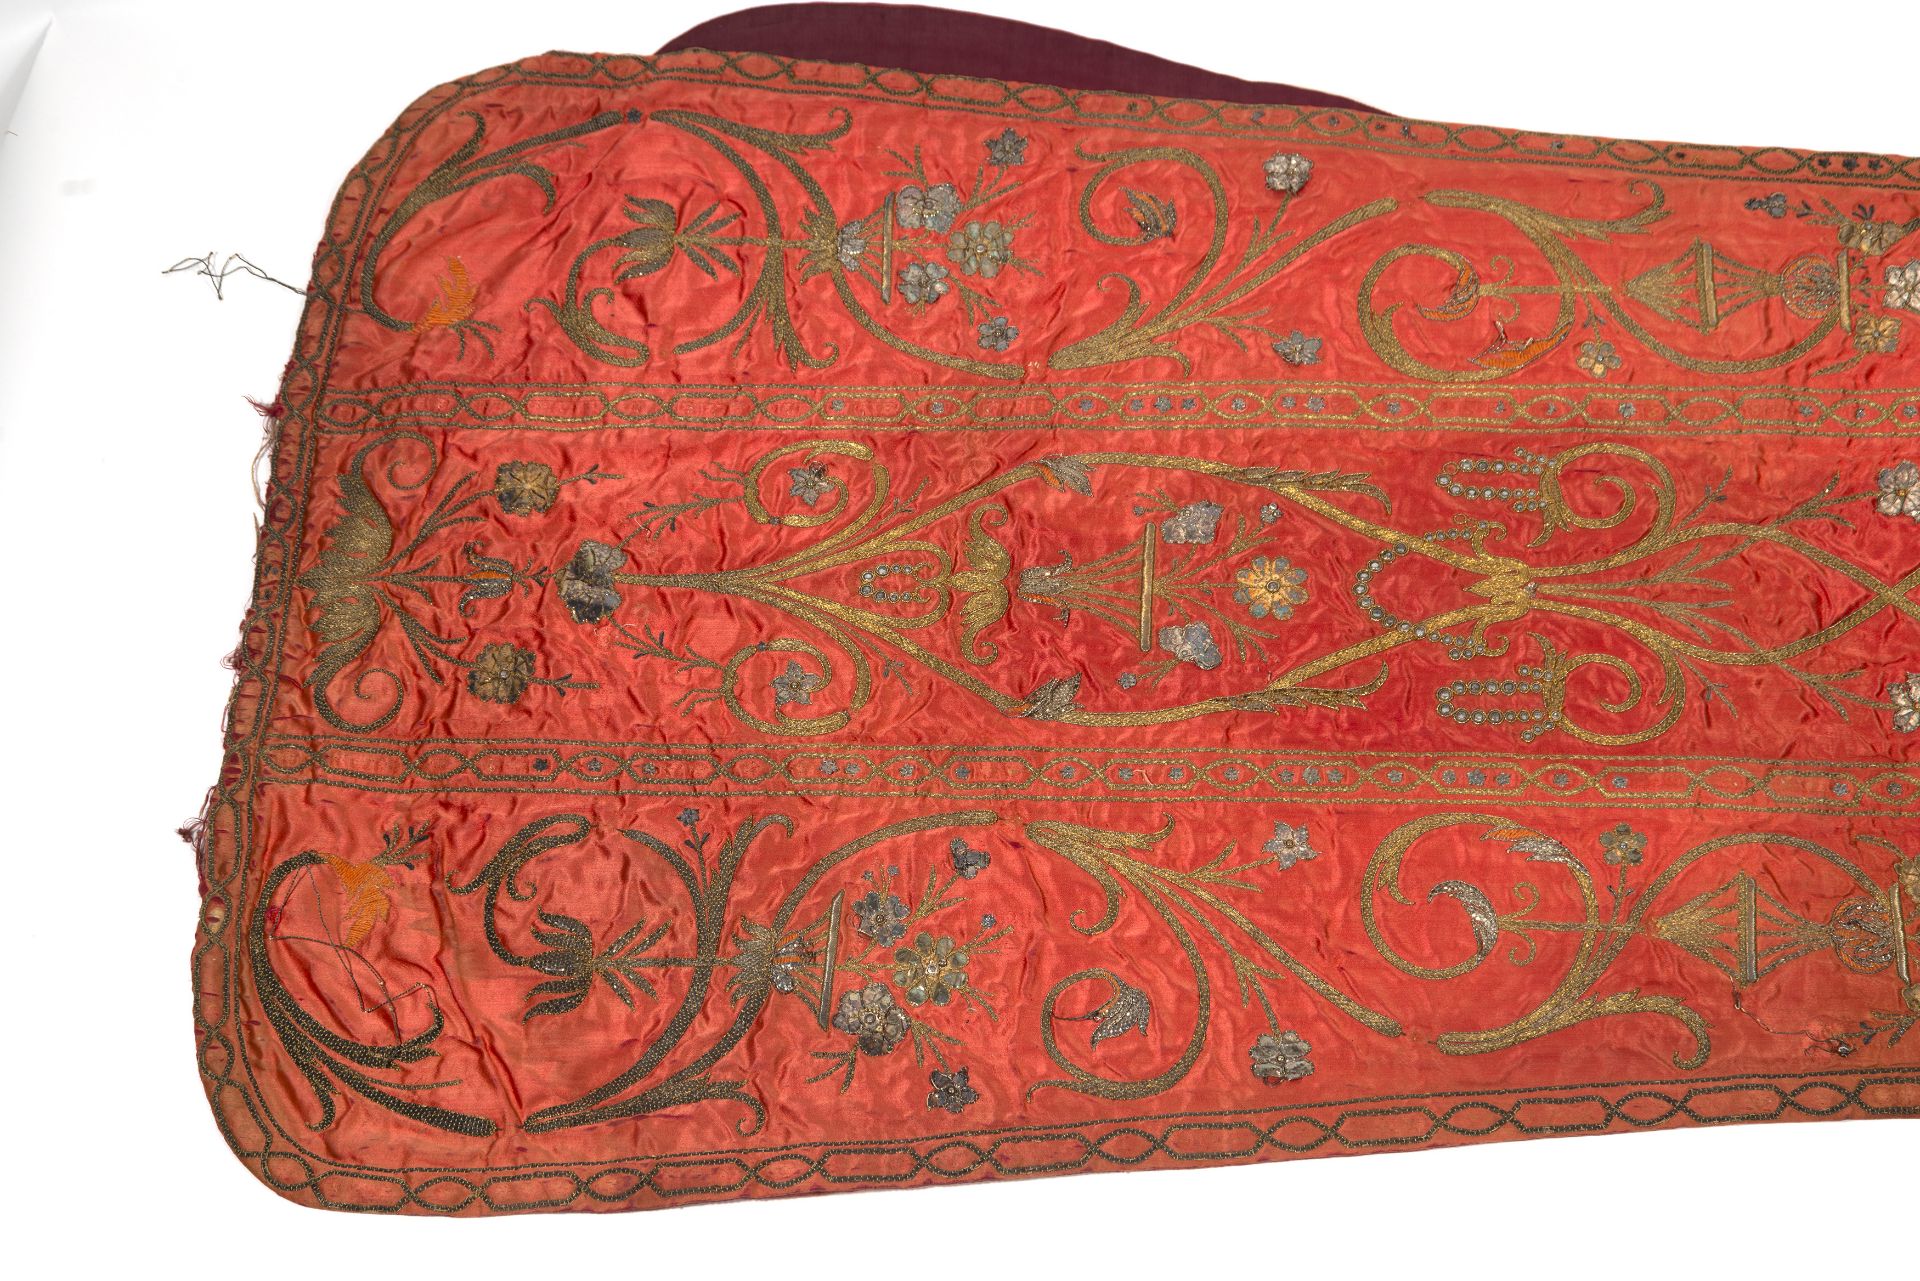 Ecclesiastical Priest's Chasuble, in silk, 19th century - Image 5 of 6